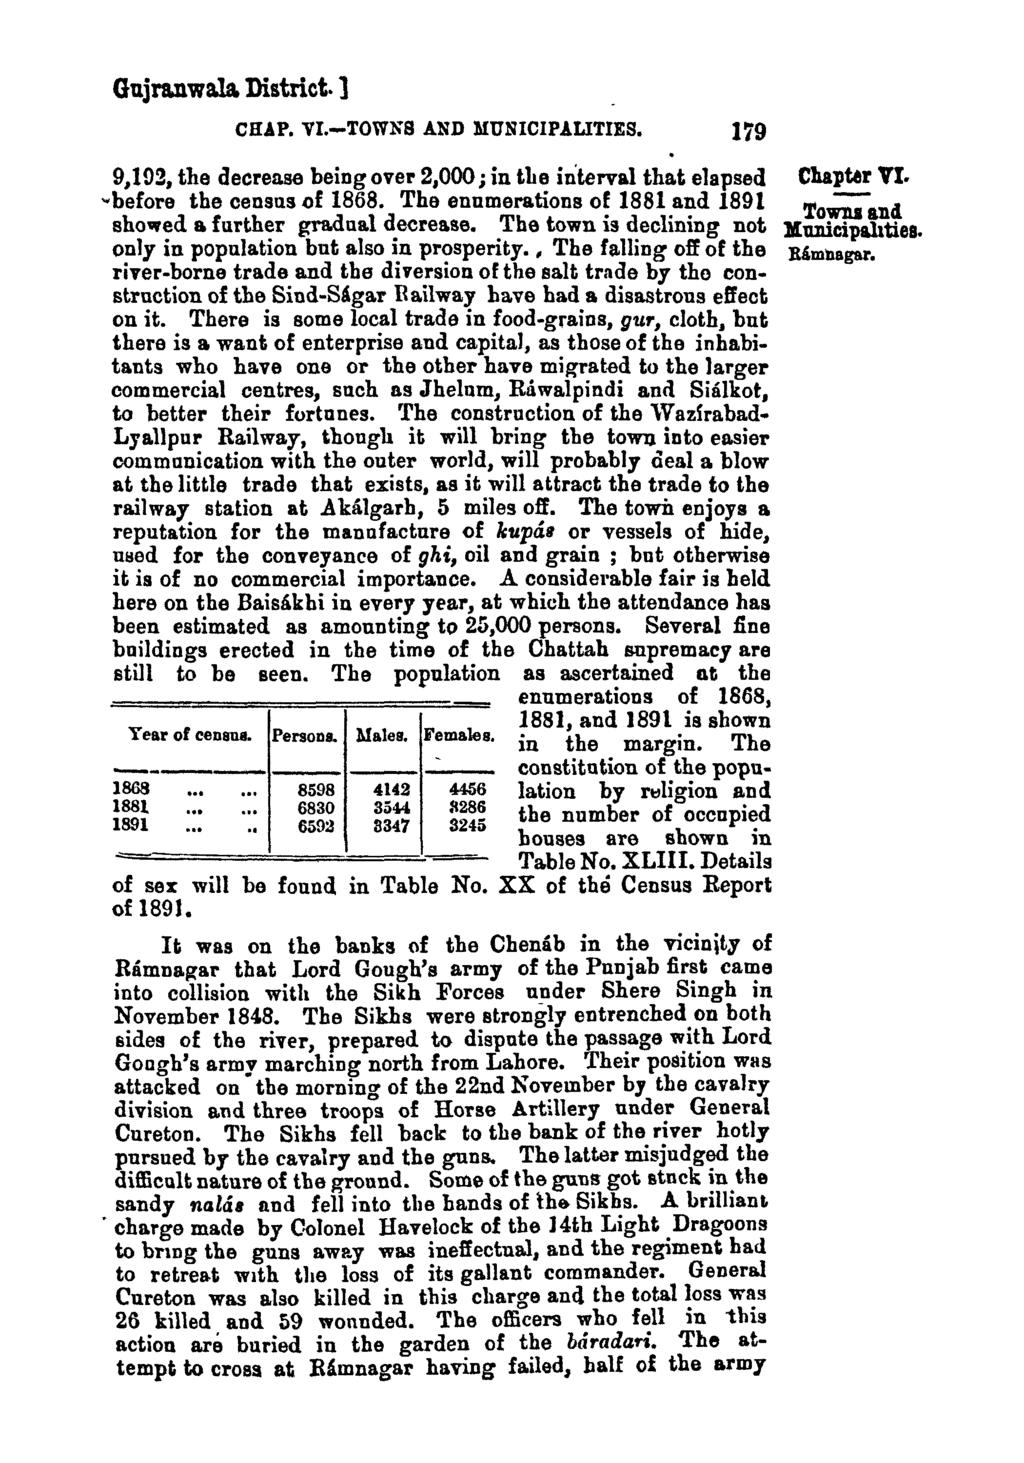 Gujra.nwala. District. ] CHAP. VI.-TOWNS AND MUNICIPALITIES. 179 9,102, the decrease being over 2,000; in tite interval that elapsed.. before the census of 1868.